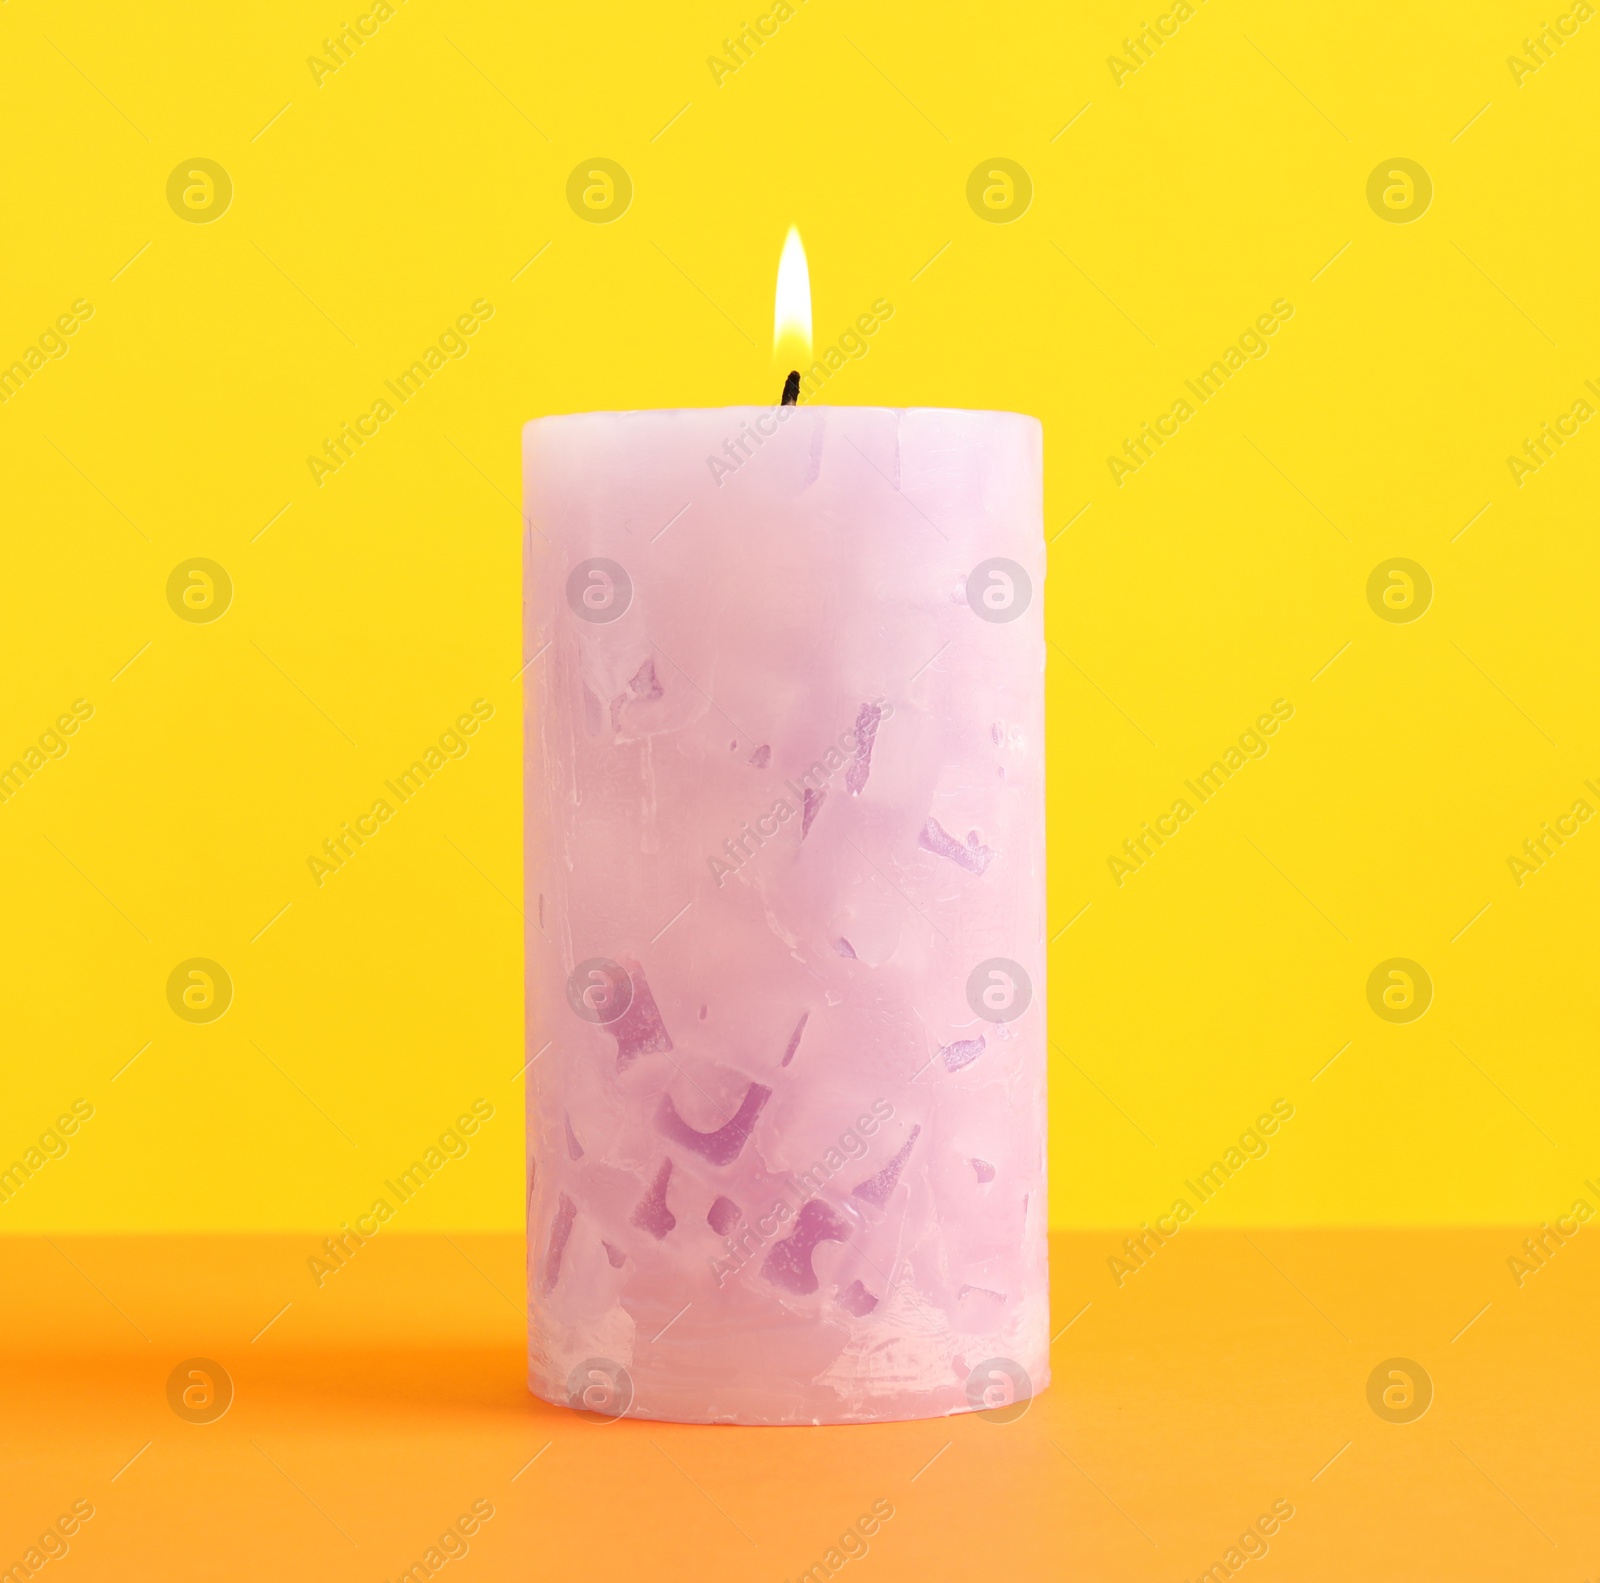 Photo of Alight scented wax candle on color background